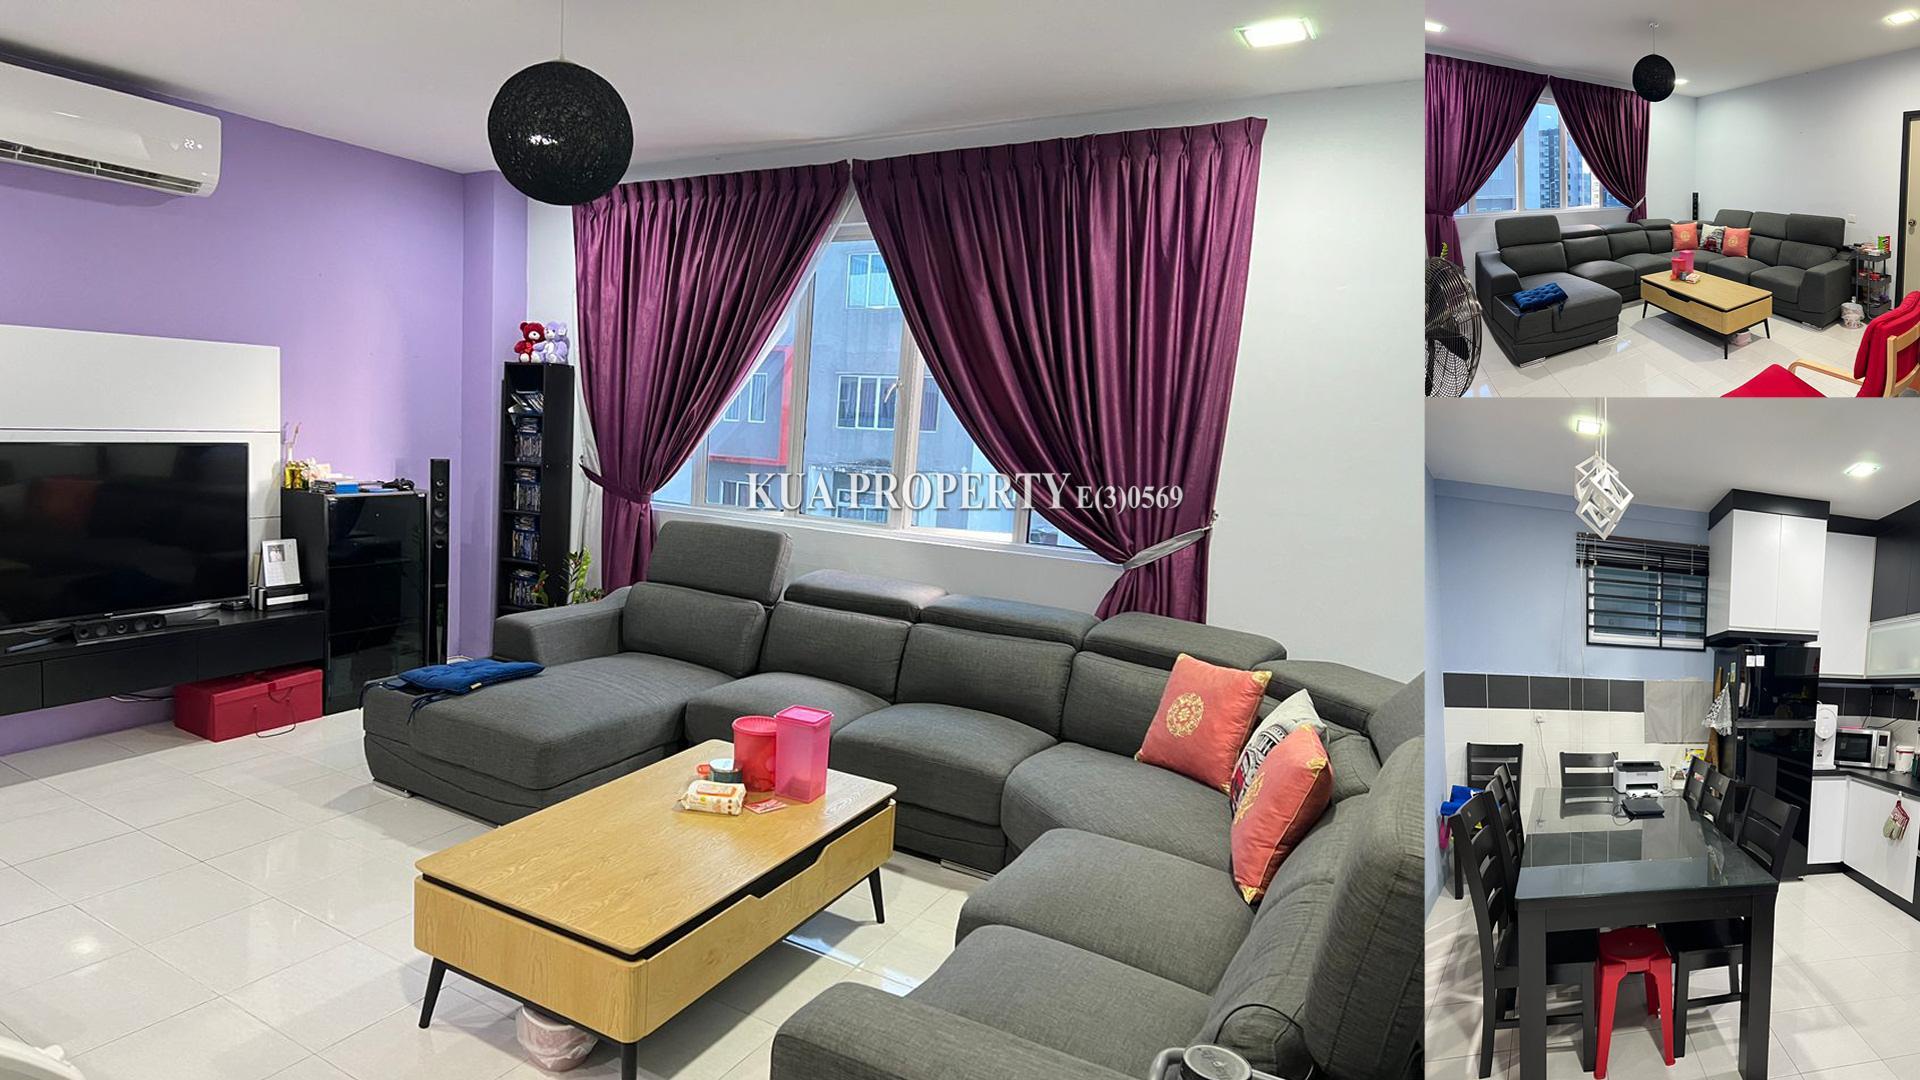 Stutong Heights Apartment For Sale! at Stutong Baru